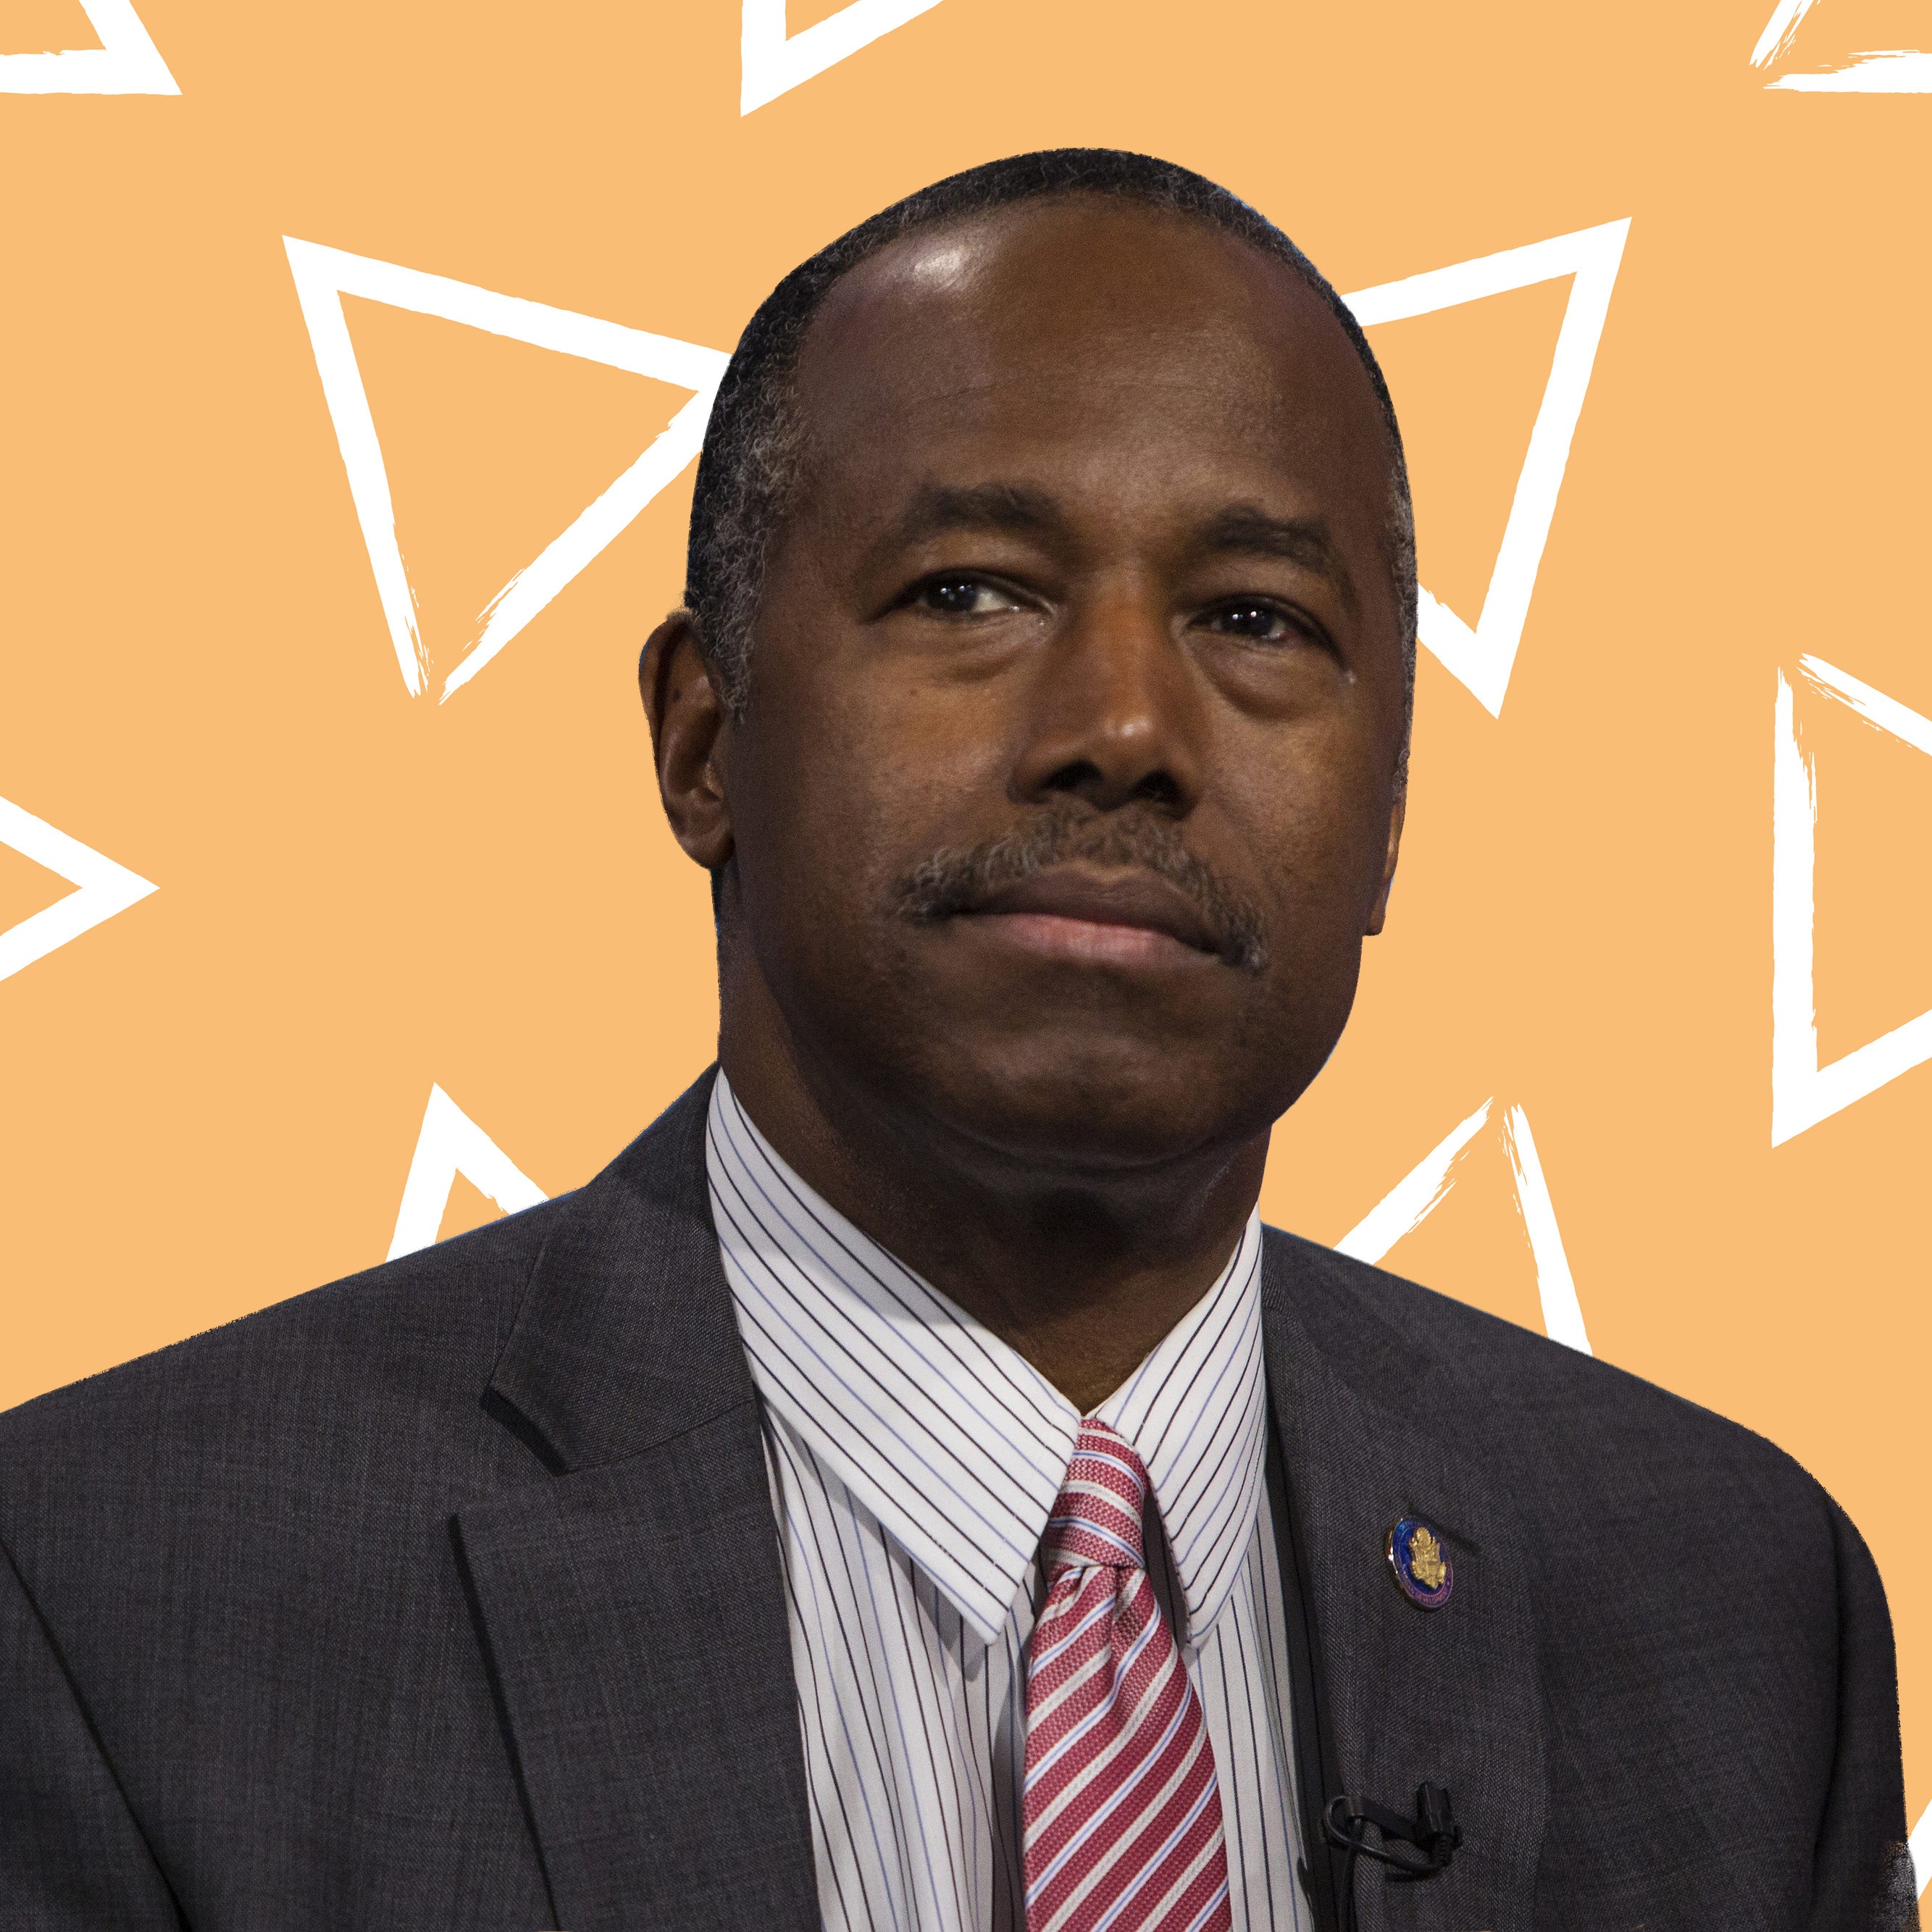 OPINION: Isn't It Time For Ben Carson To Go Back To Medicine?
